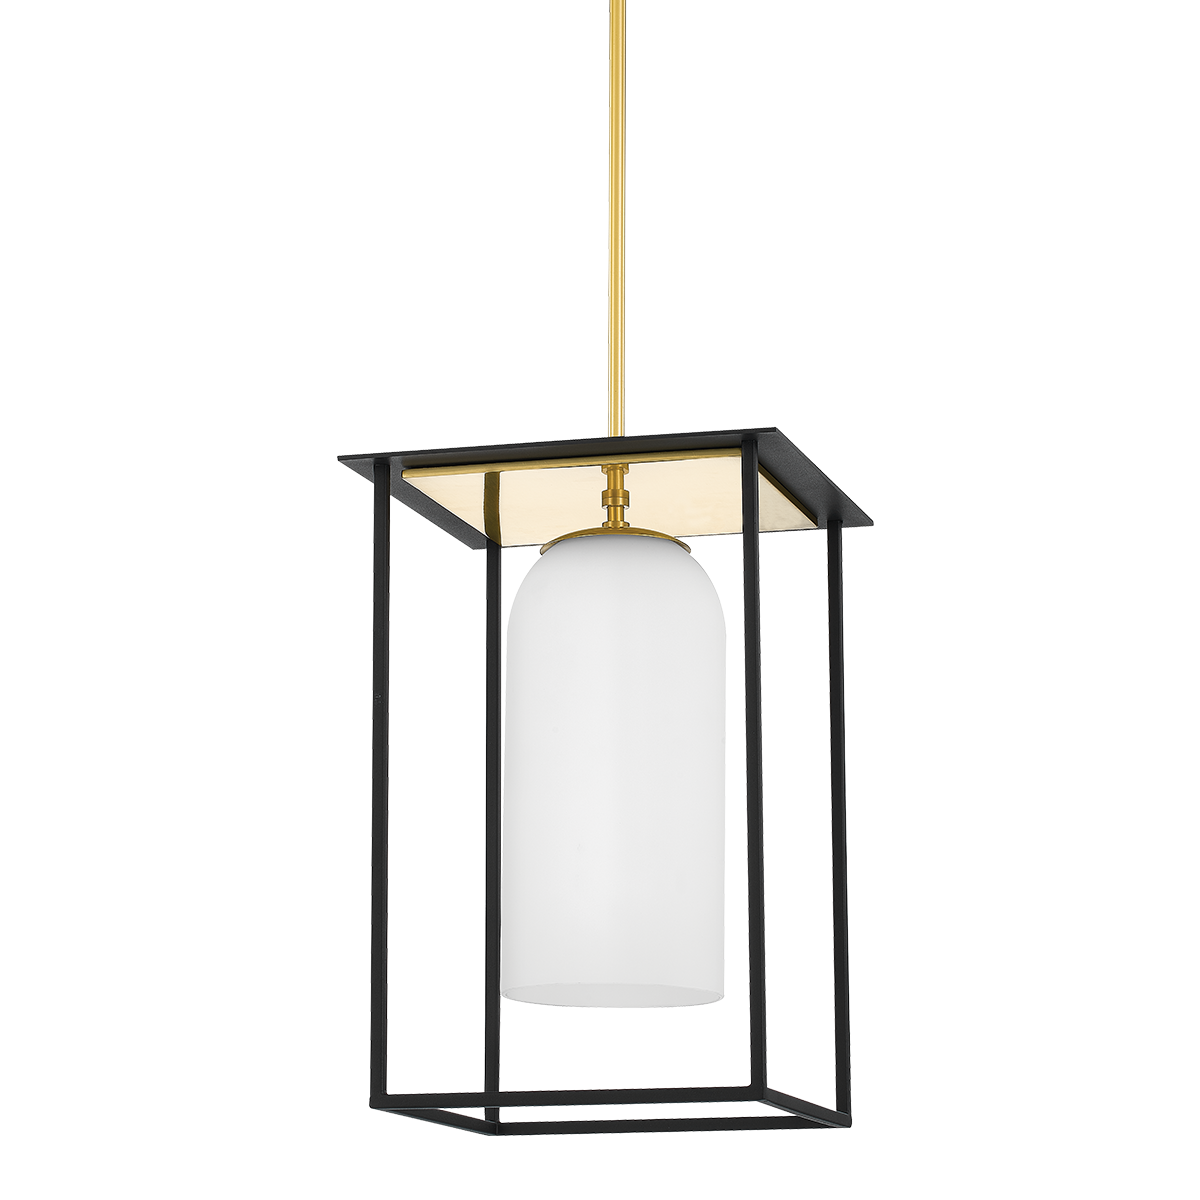 Steel Dual Tone Open Air Frame with Opal Matte Cylindrical Glass Shade Pendant